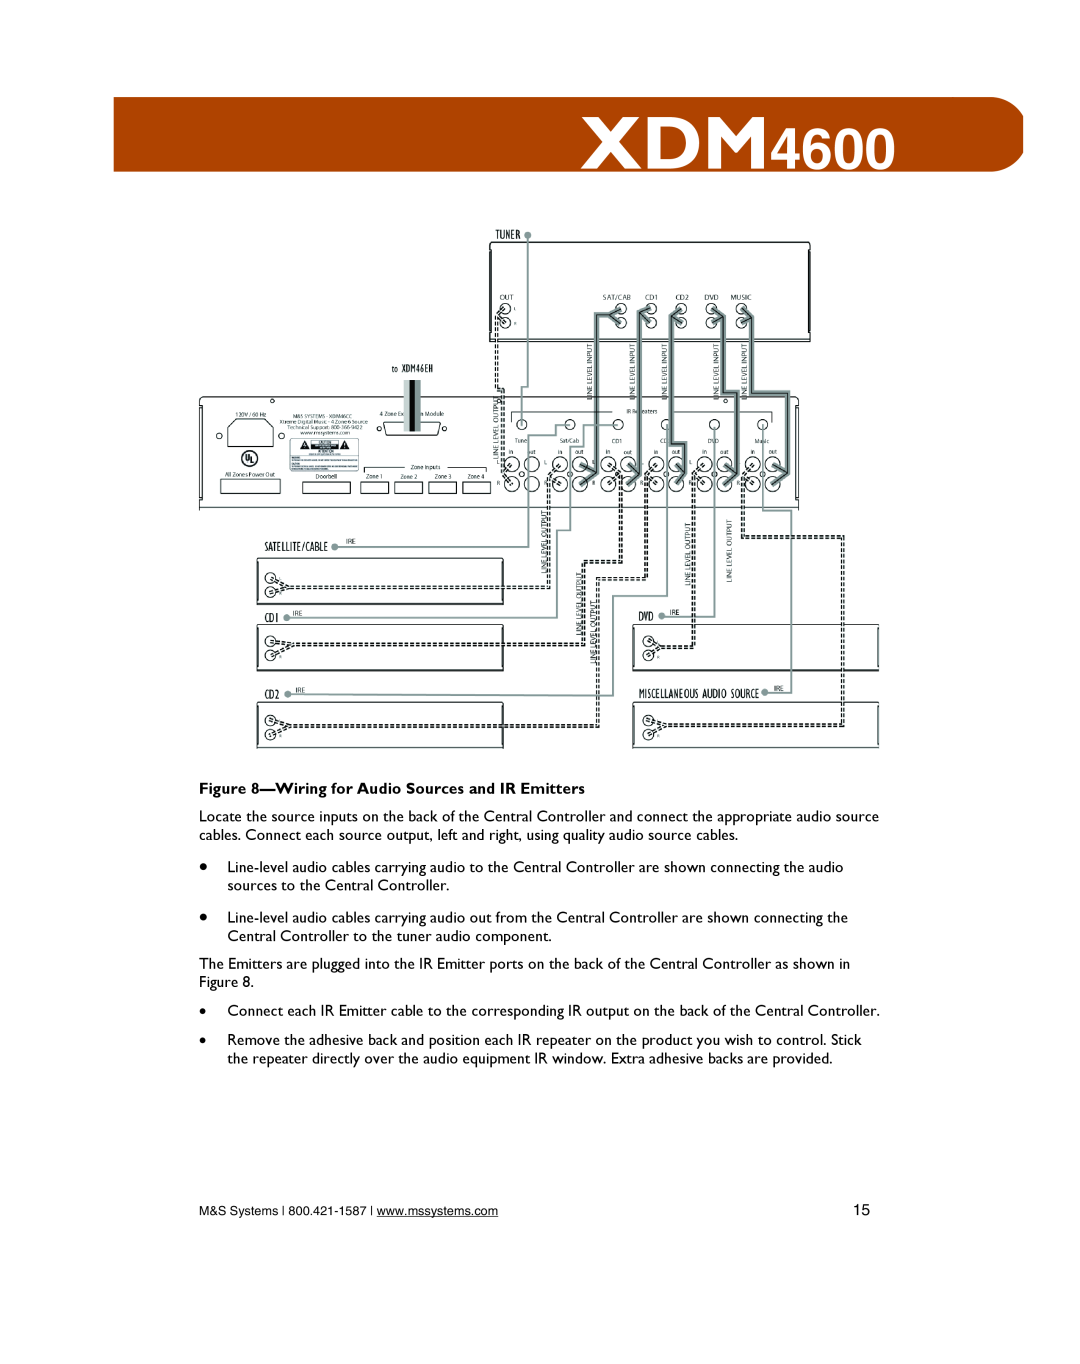 M&S Systems XDM4600 owner manual Wiringfor Audio Sources and IR Emitters 